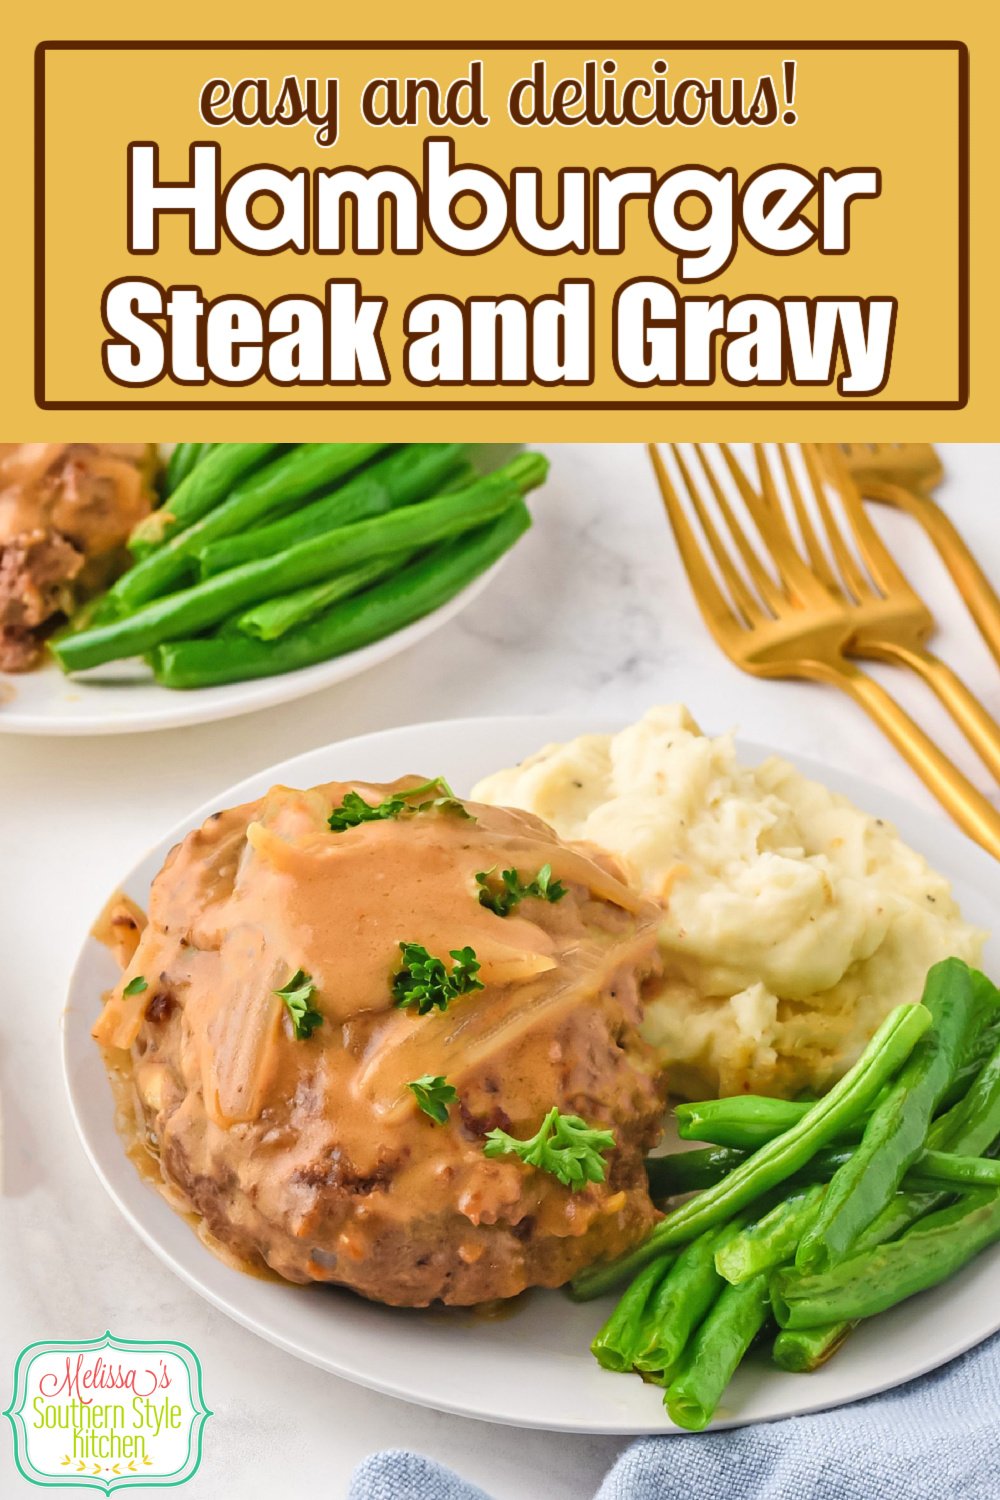 This easy Hamburger Steak recipe is smothered with a rich homemade onion gravy. It's a Southern style feast with a side of mashed potatoes #hamburgersteak #besthamburgerrecipes #southernhamburgersteak #oniongravy #salisburysteak #easyhamburgersteaks #easygroundbeefrecipes via @melissasssk